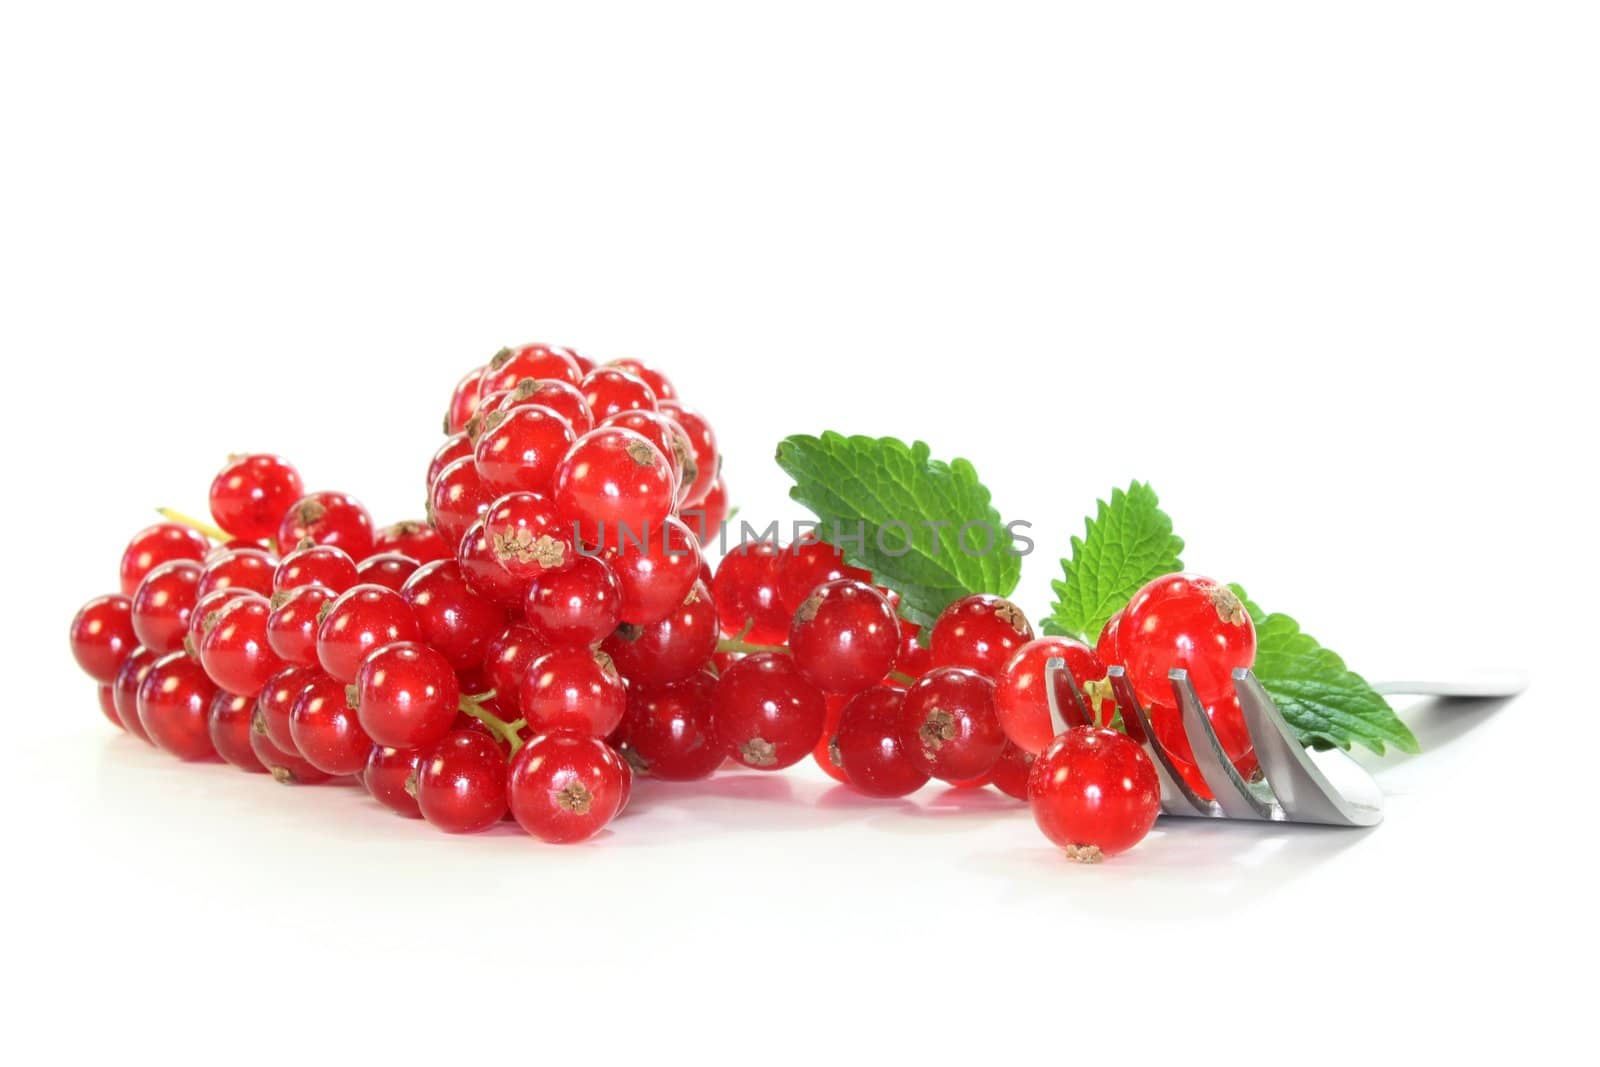 fresh red currants on a white background
